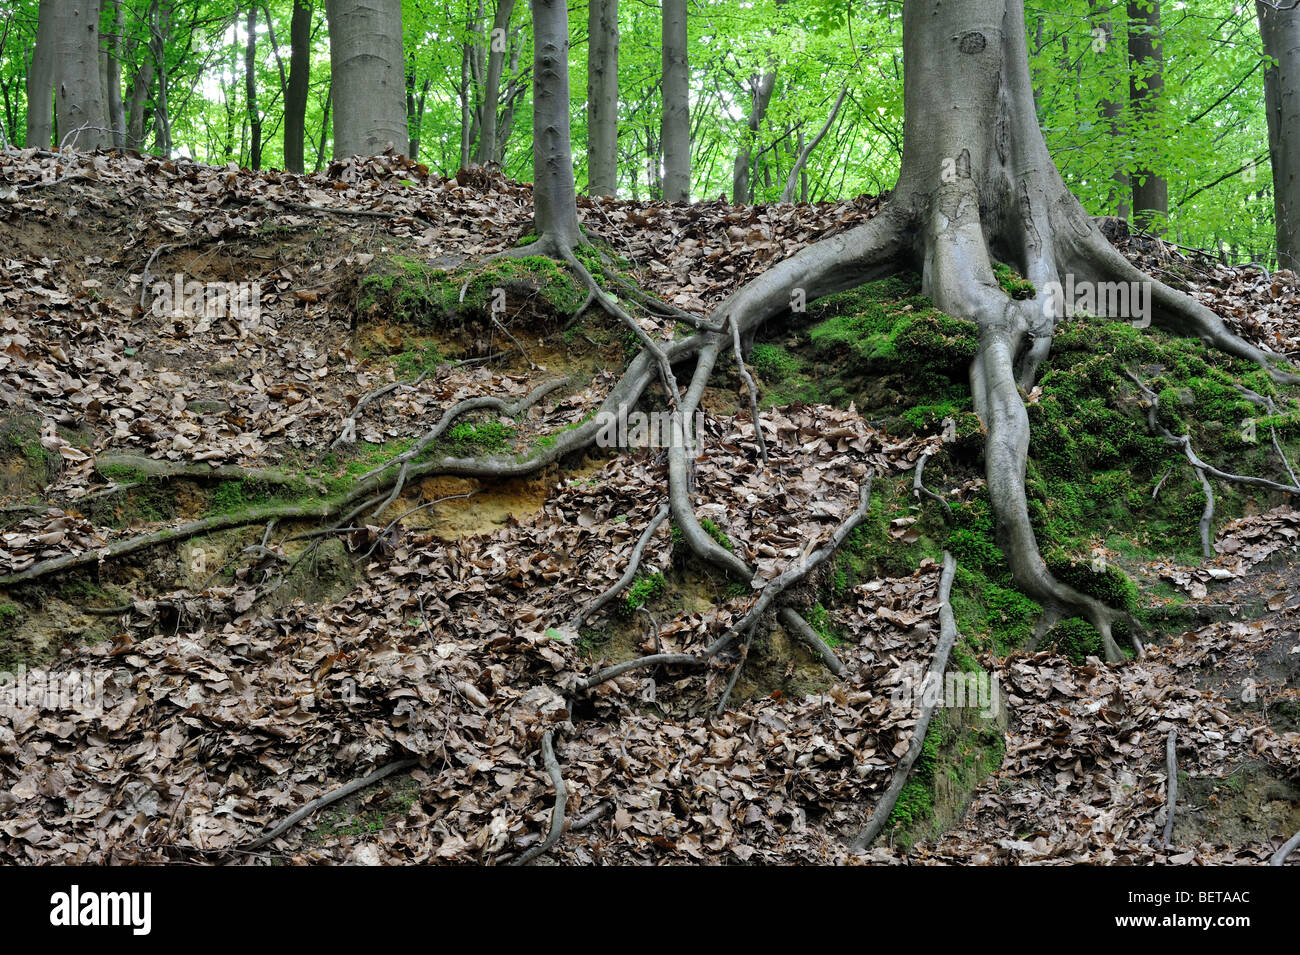 Exposed roots of European Beech tree (Fagus sylvatica) in broadleaf forest Stock Photo